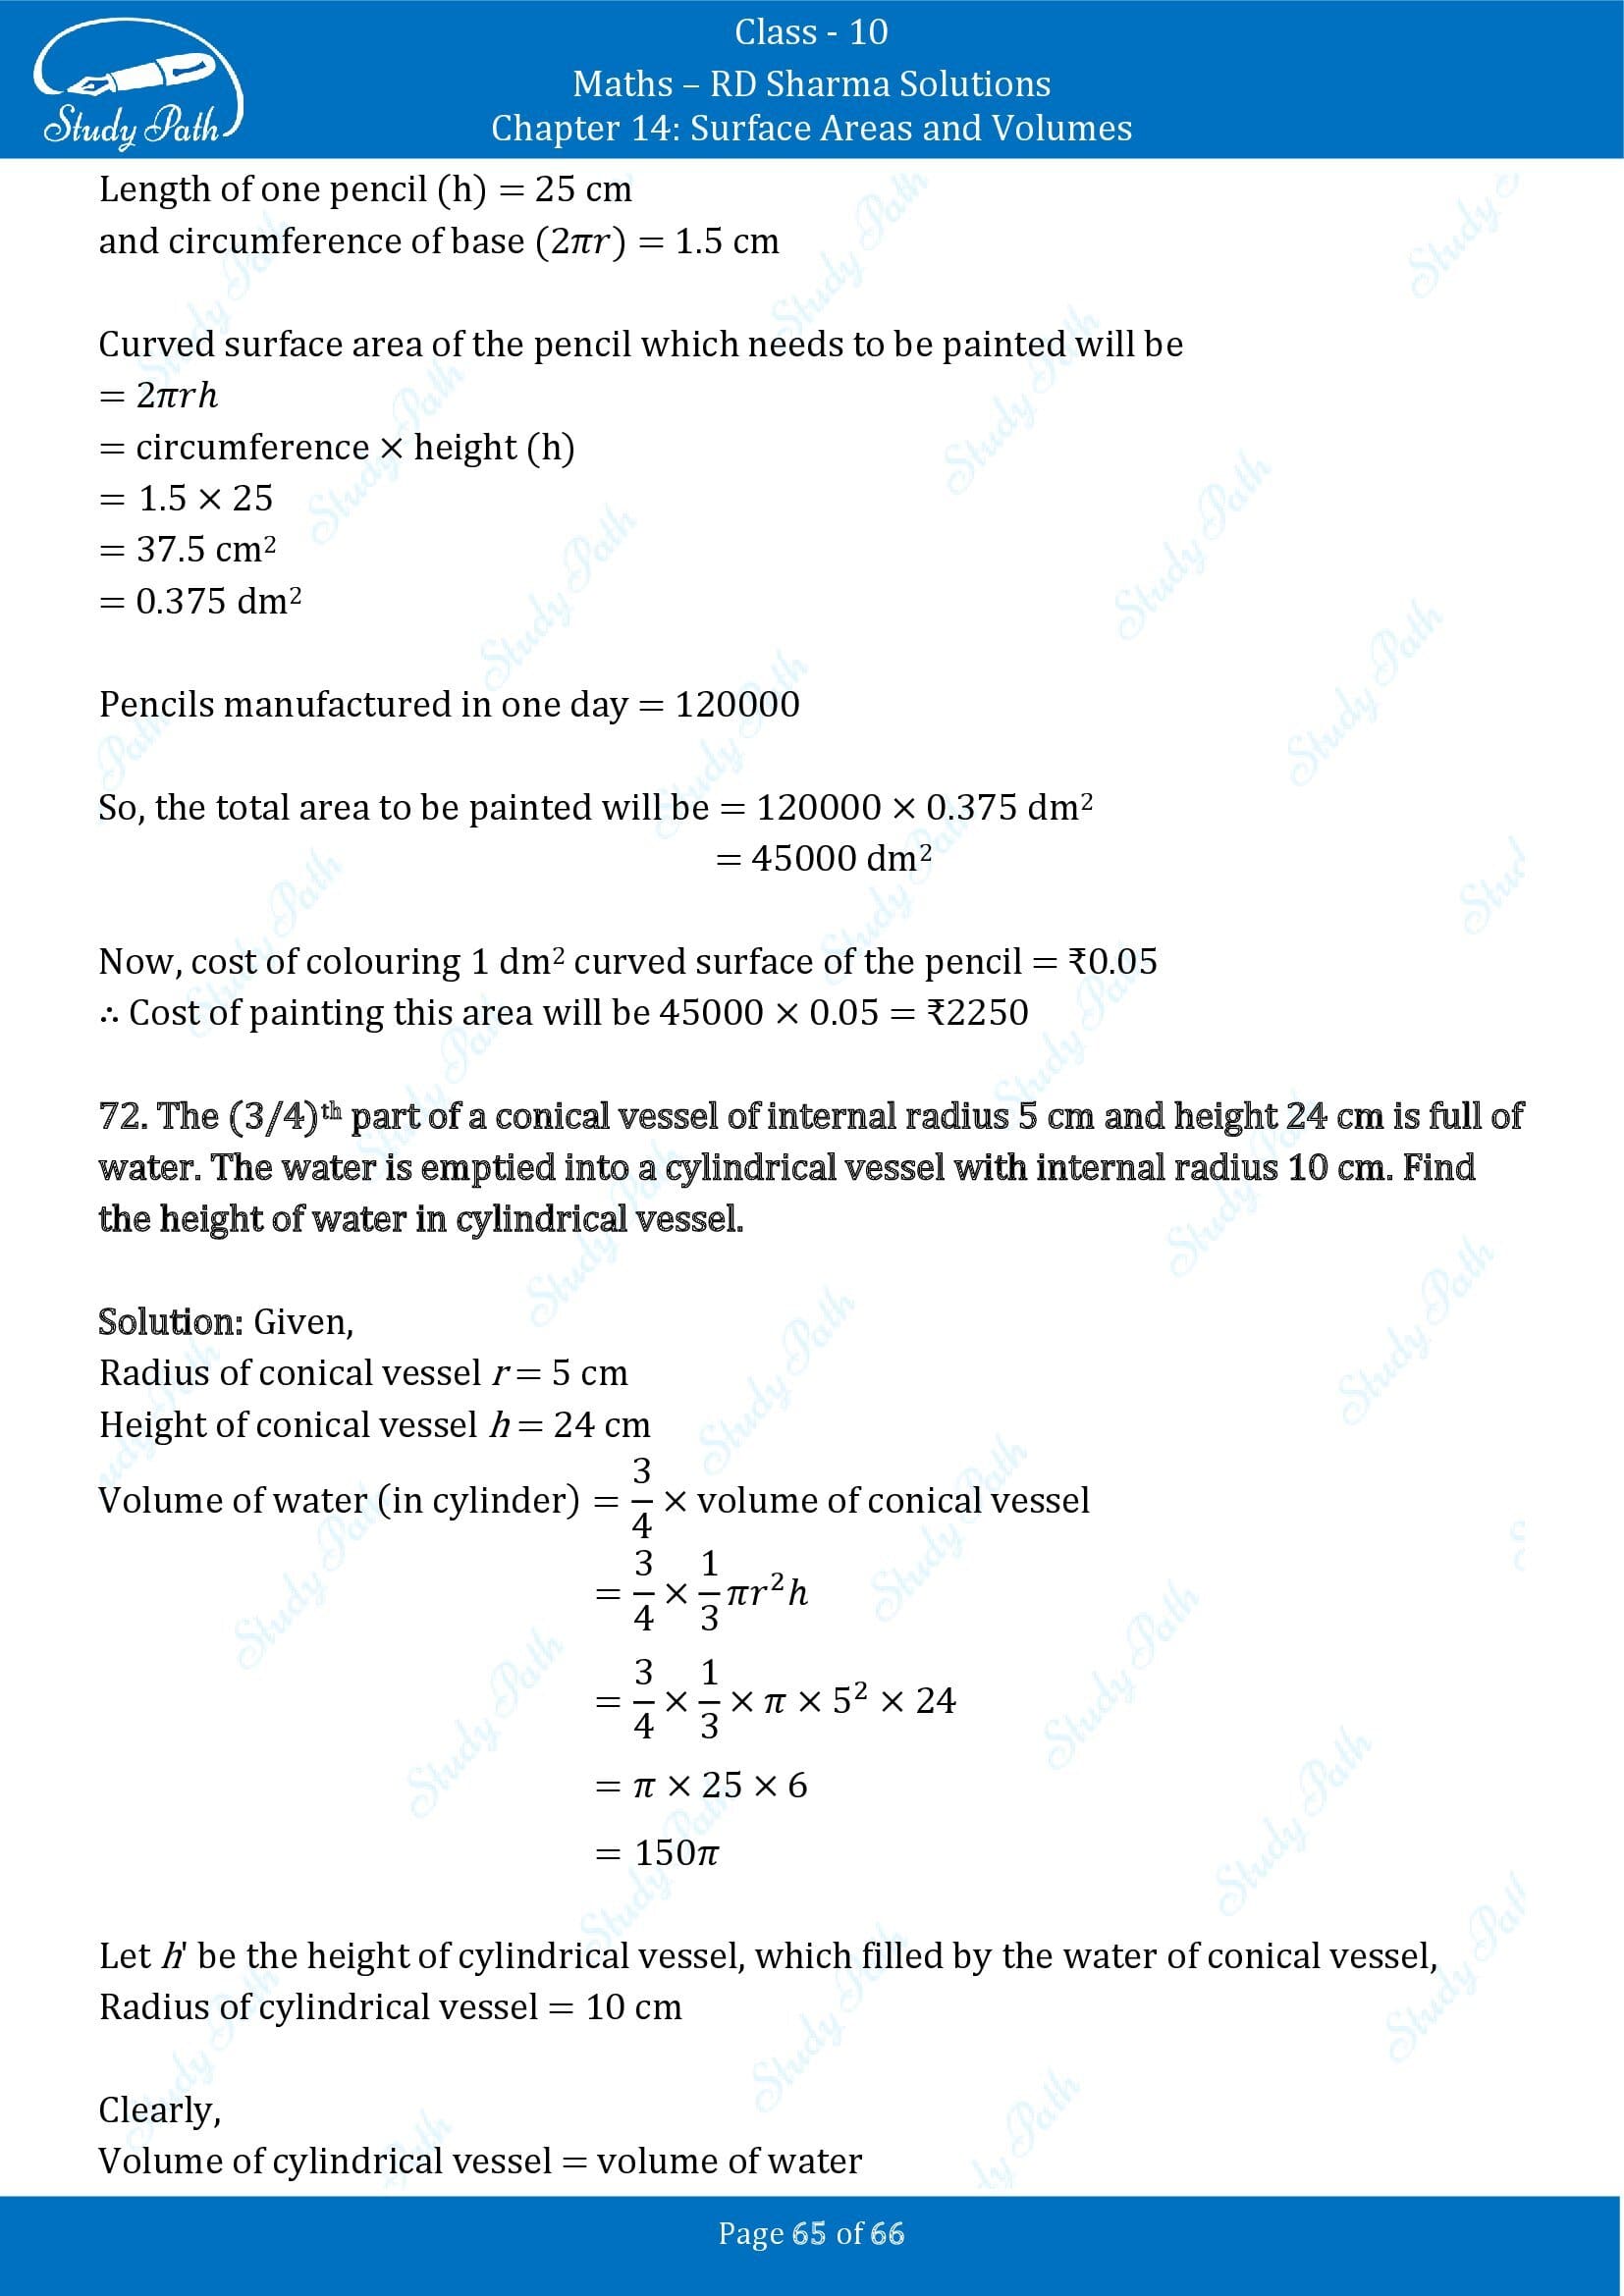 RD Sharma Solutions Class 10 Chapter 14 Surface Areas and Volumes Exercise 14.1 00065